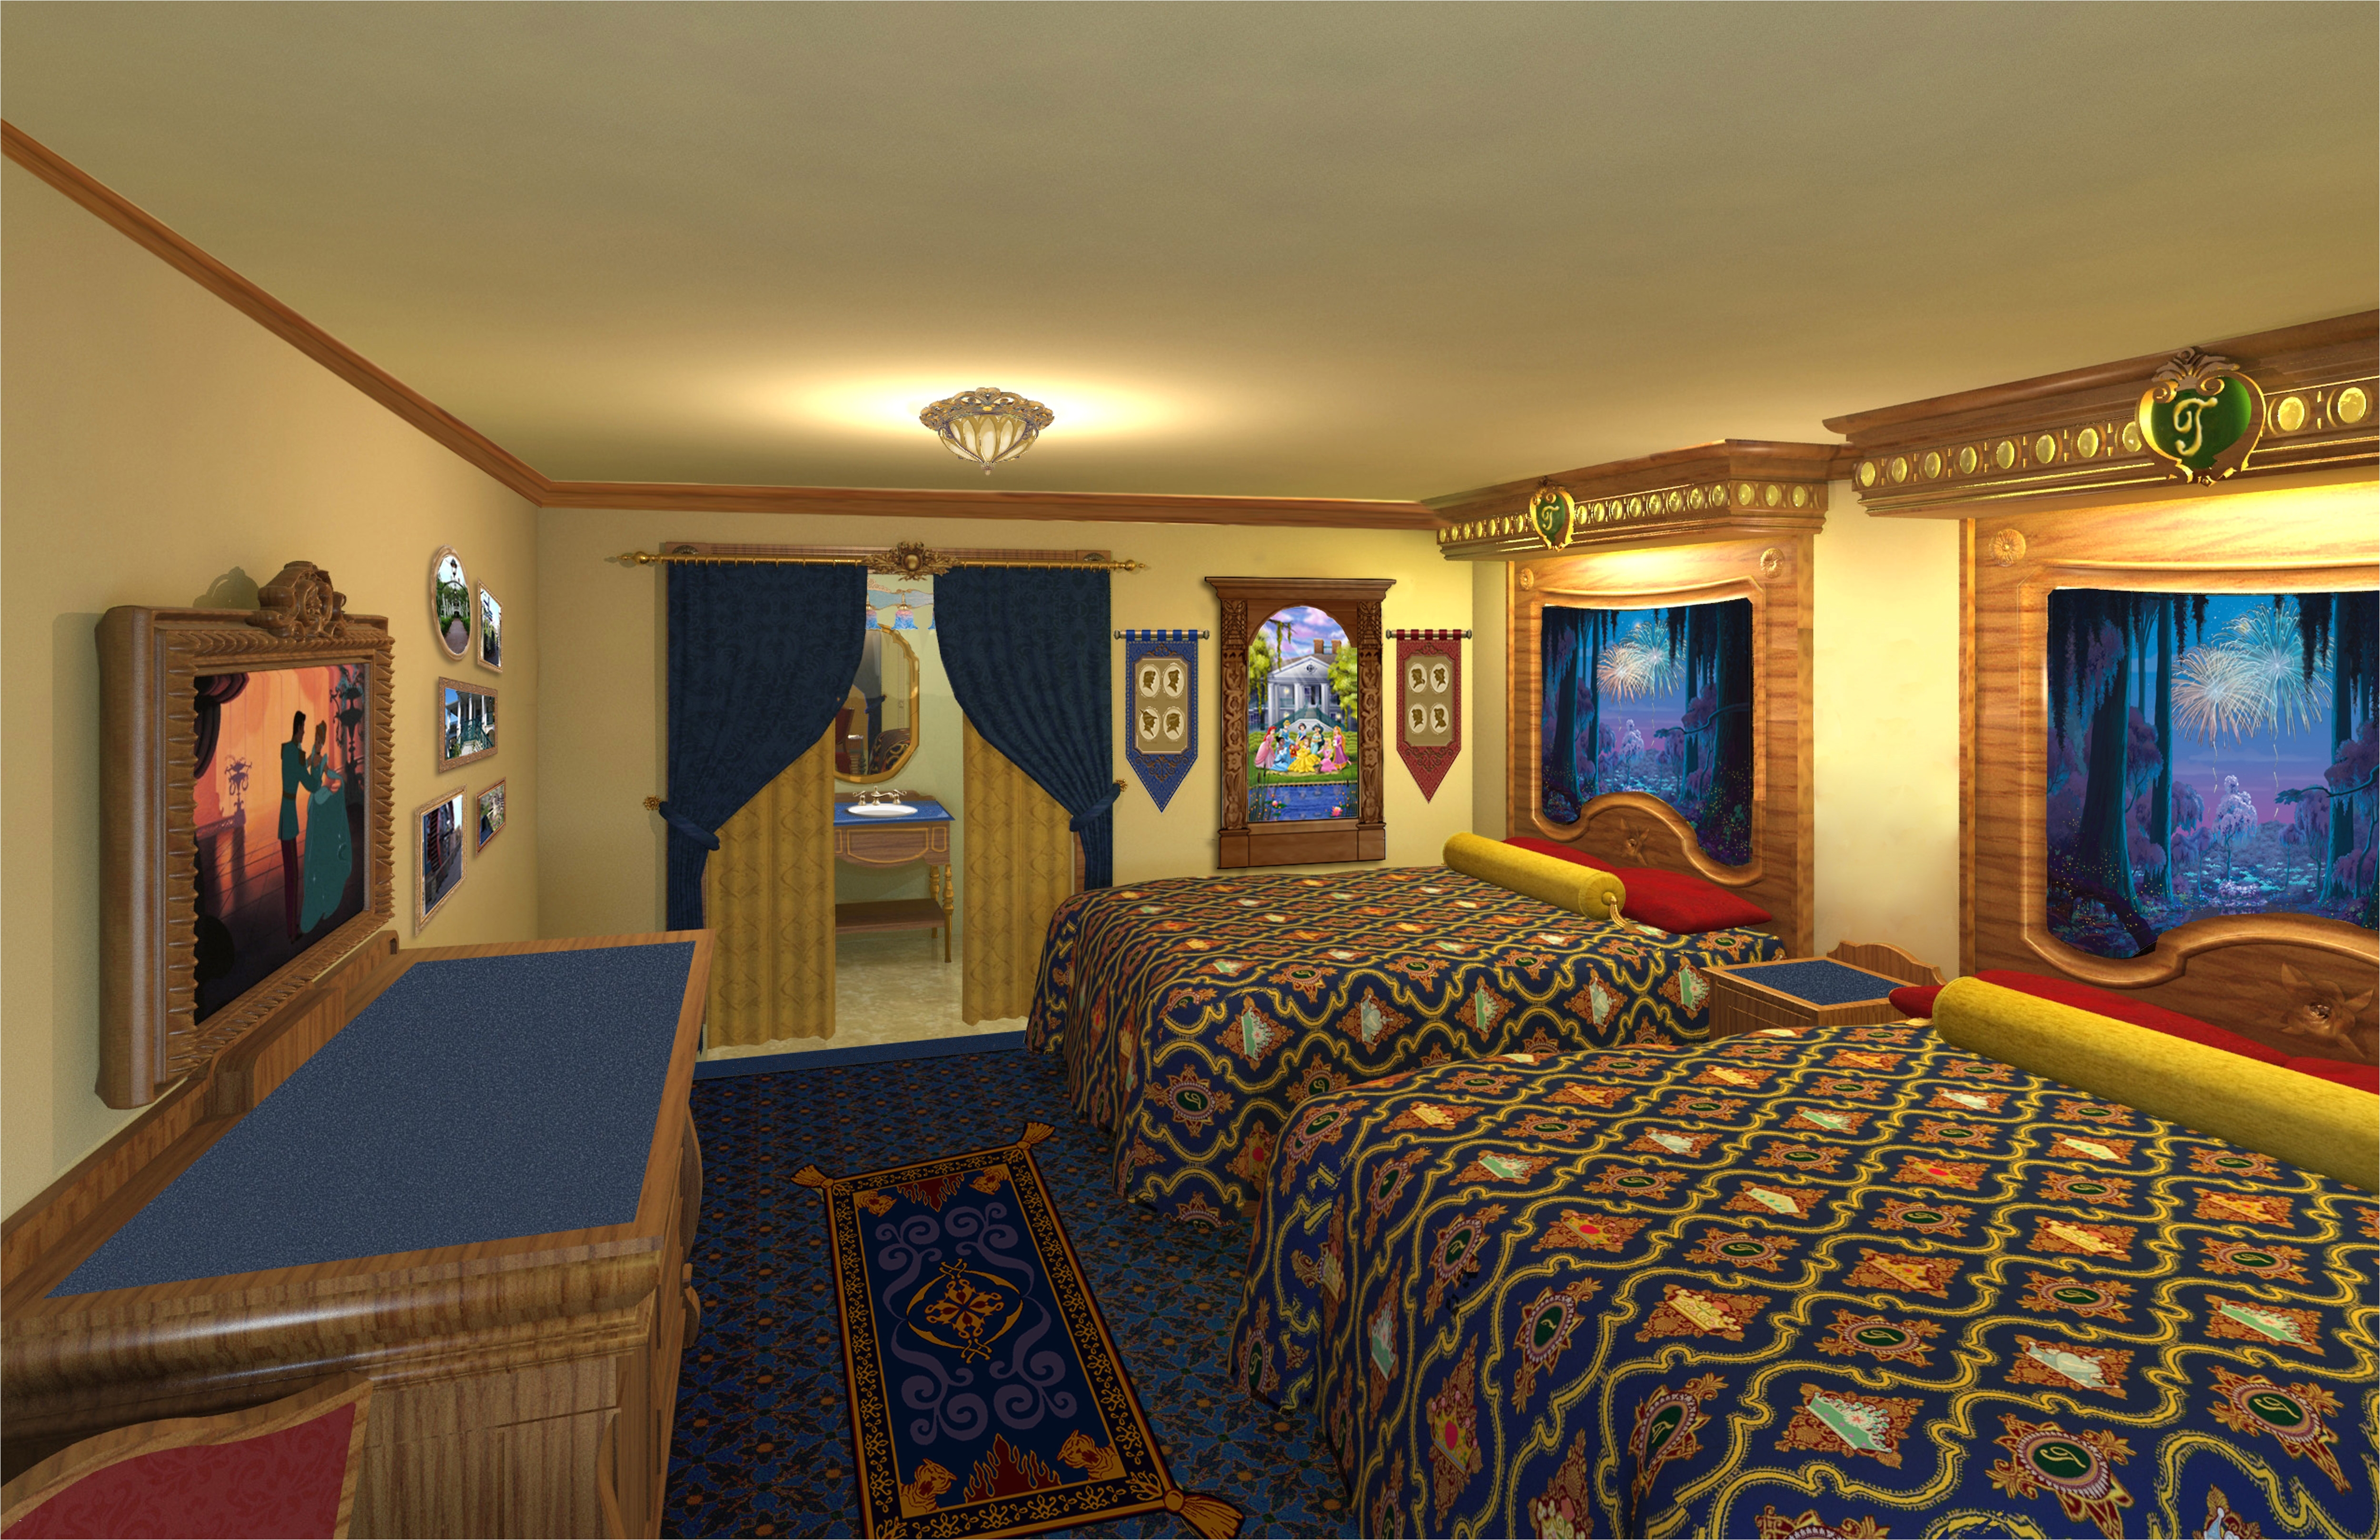 details and layouts of the royal guest rooms located in two magnolia bend mansion buildings at